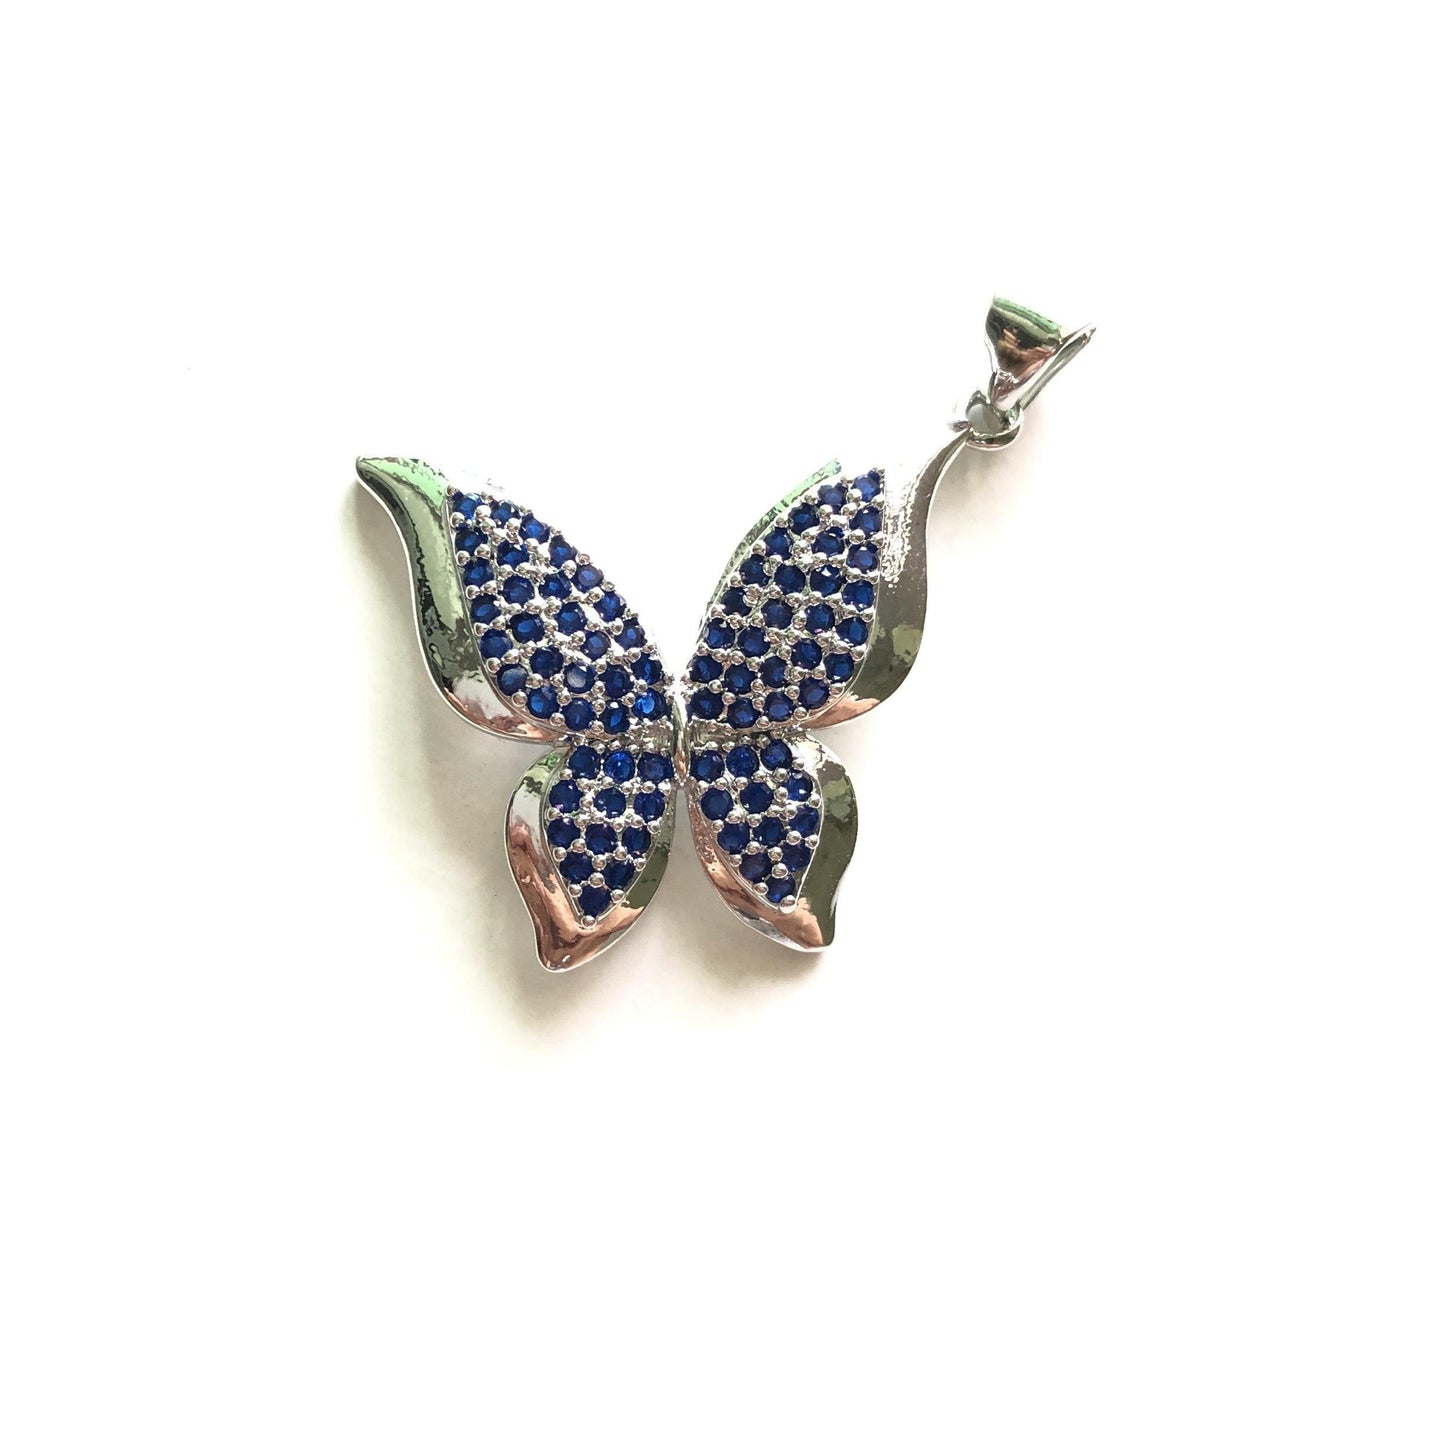 5pcs/lot 27*23mm Multicolor CZ Paved Butterfly Charms Blue on Silver CZ Paved Charms Butterflies Colorful Zirconia Charms Beads Beyond